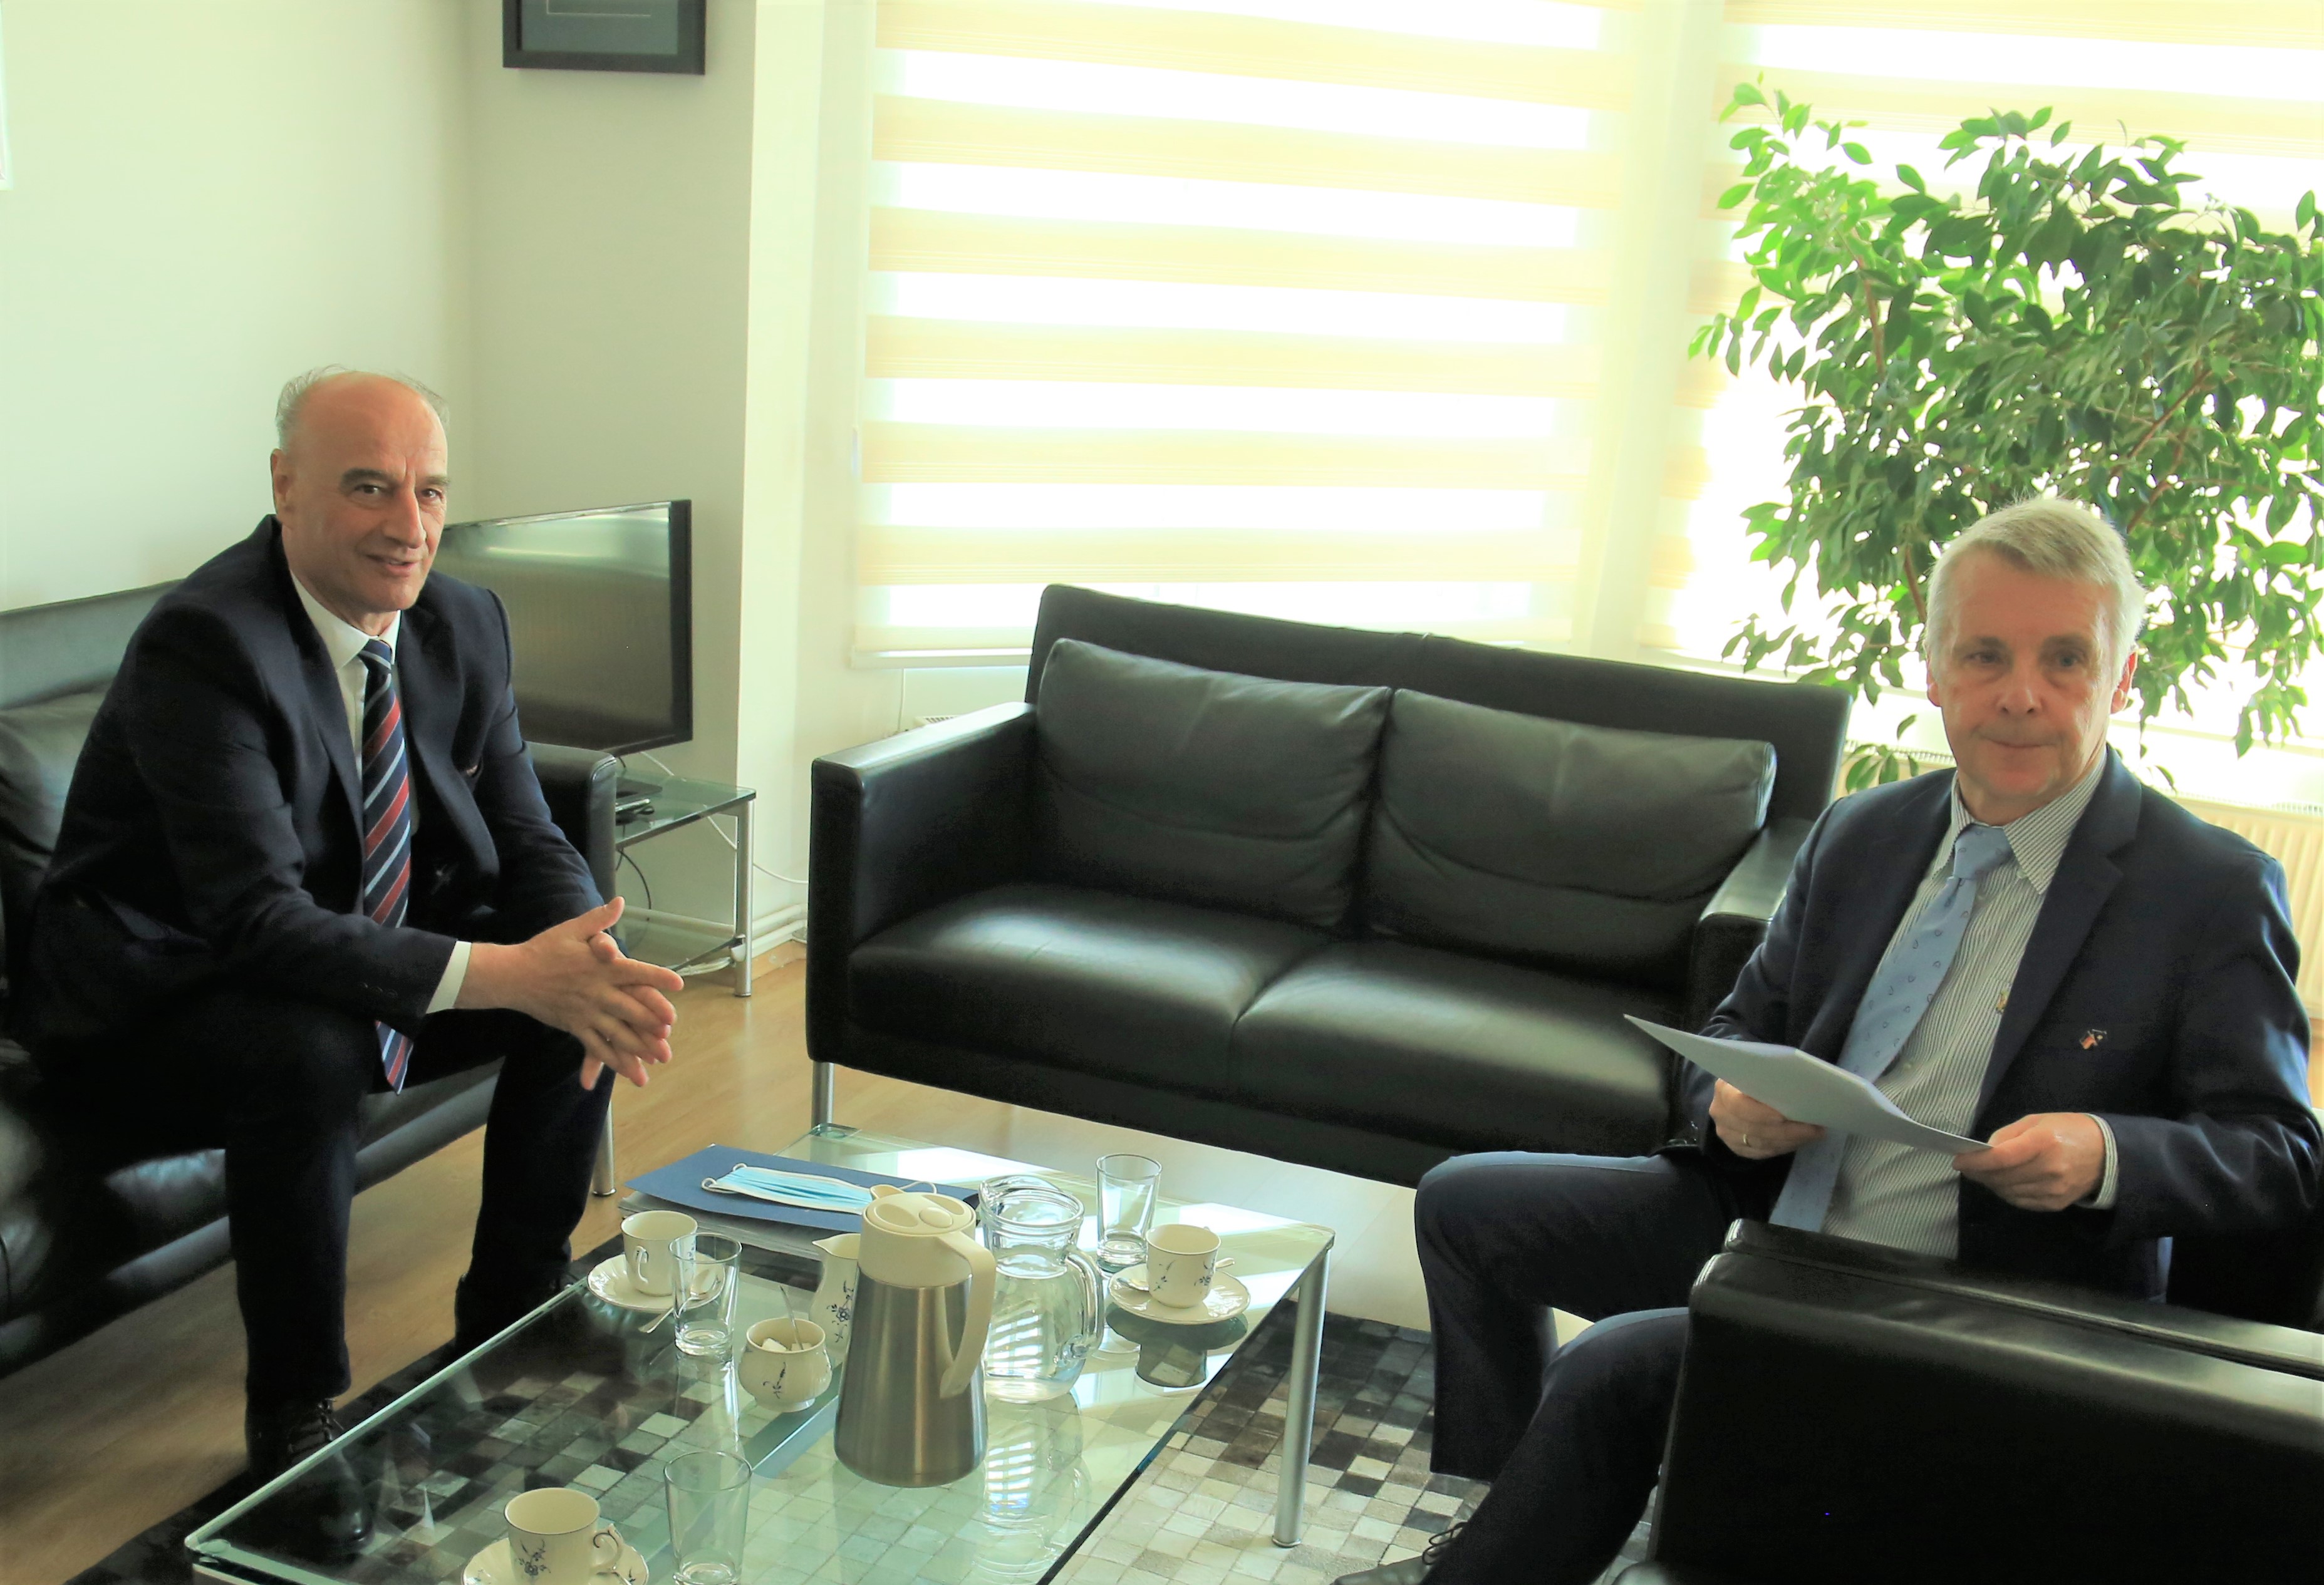 The Chairman of the KPC, Maloku, is received in a meeting by the Ambassador of Germany in Kosovo, Rohde